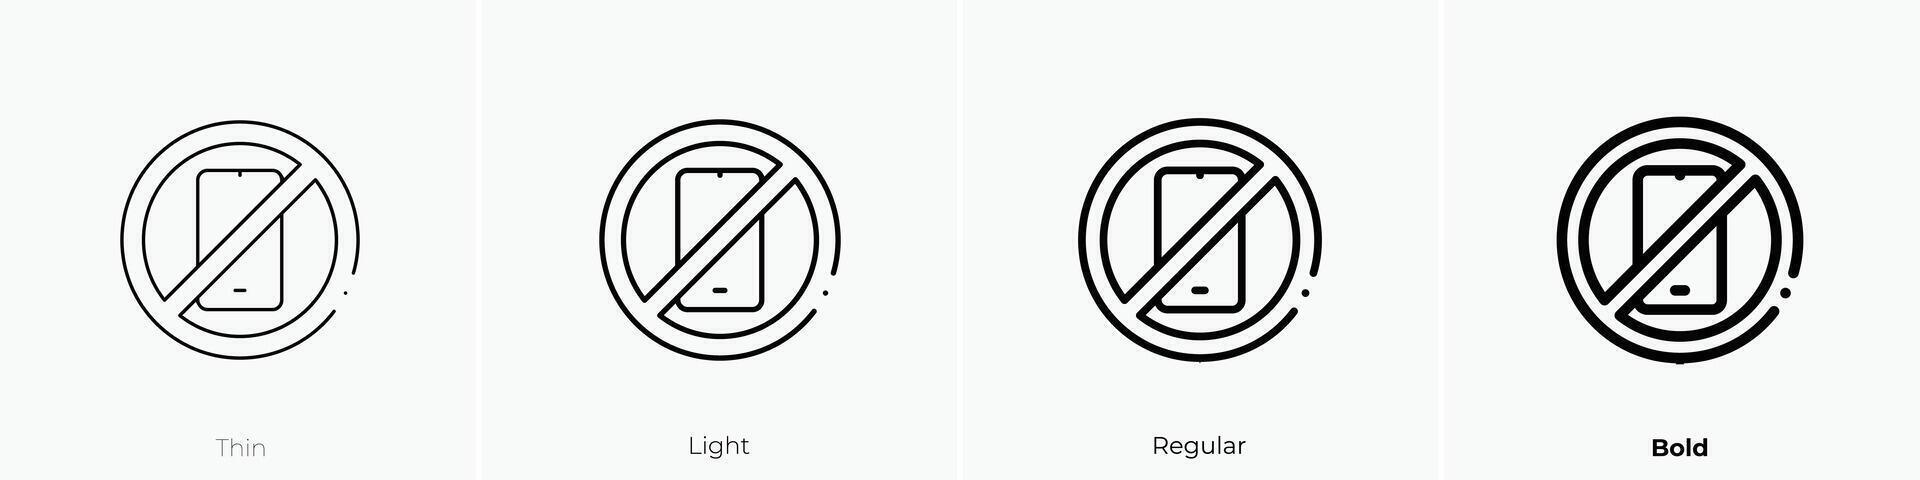 no phone icon. Thin, Light, Regular And Bold style design isolated on white background vector